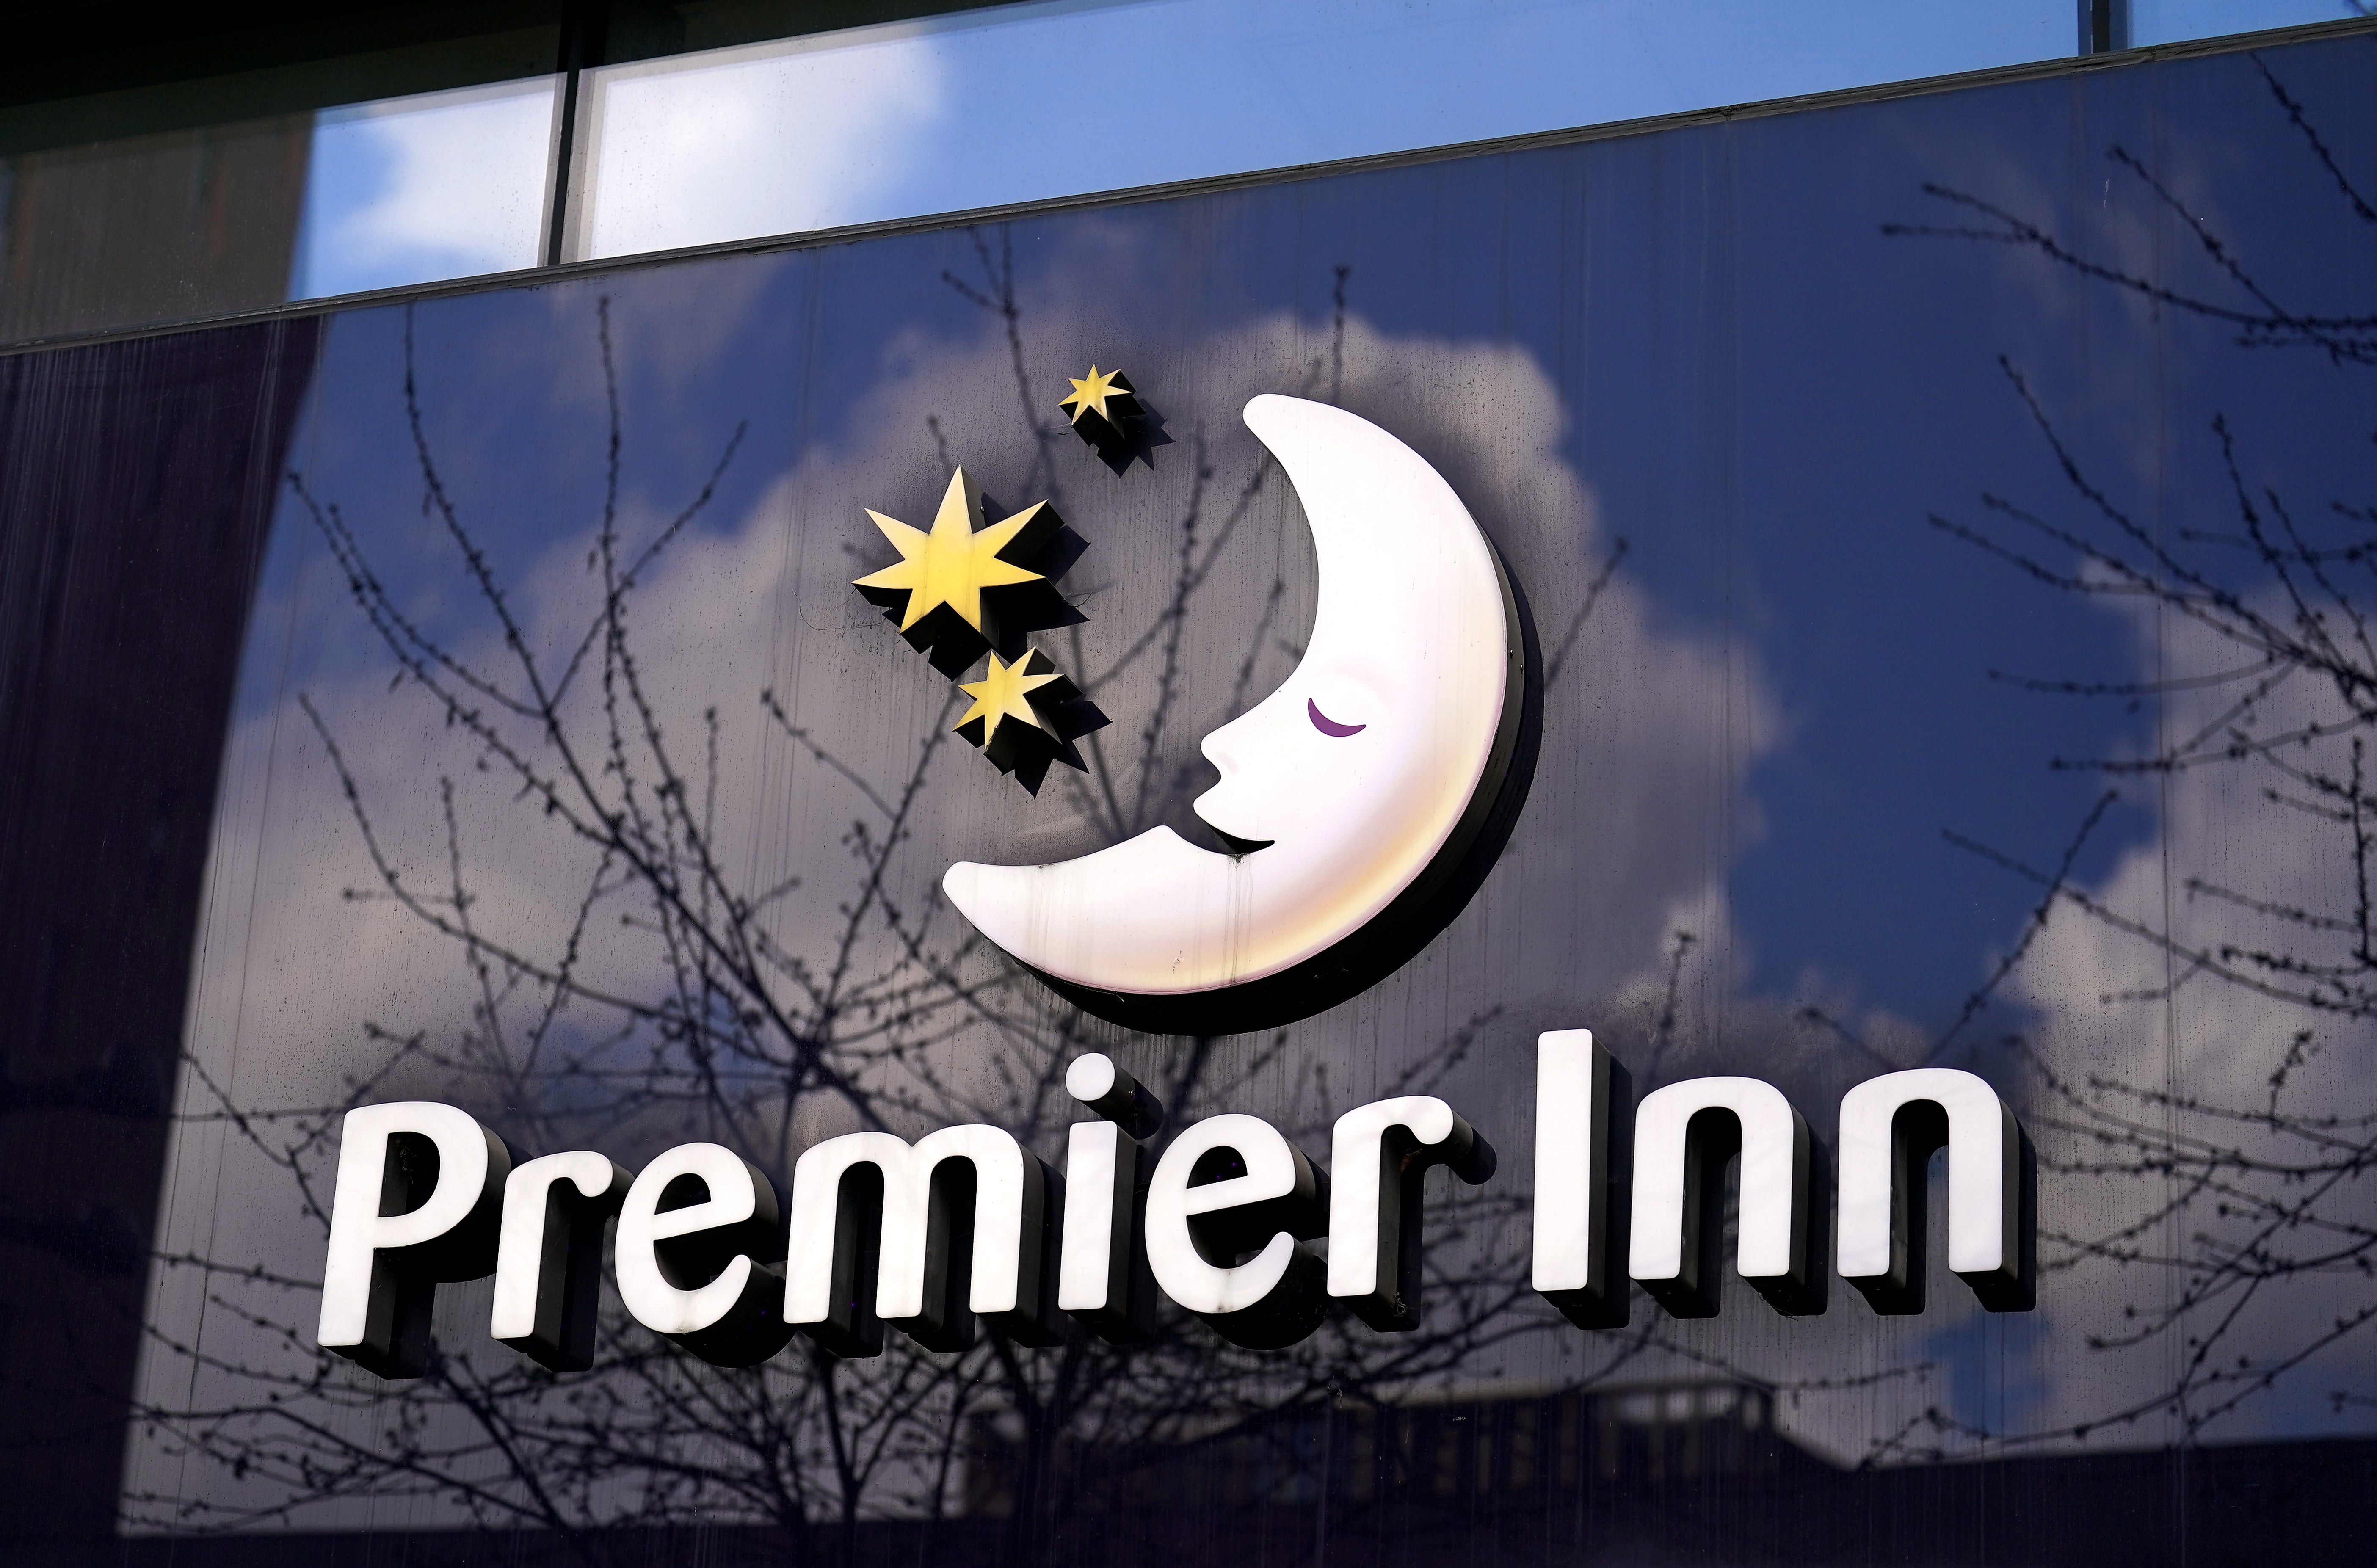 Premier Inn owner Whitbread said it expects ‘some additional costs due to targeted pay increases’ (Mike Egerton/PA)